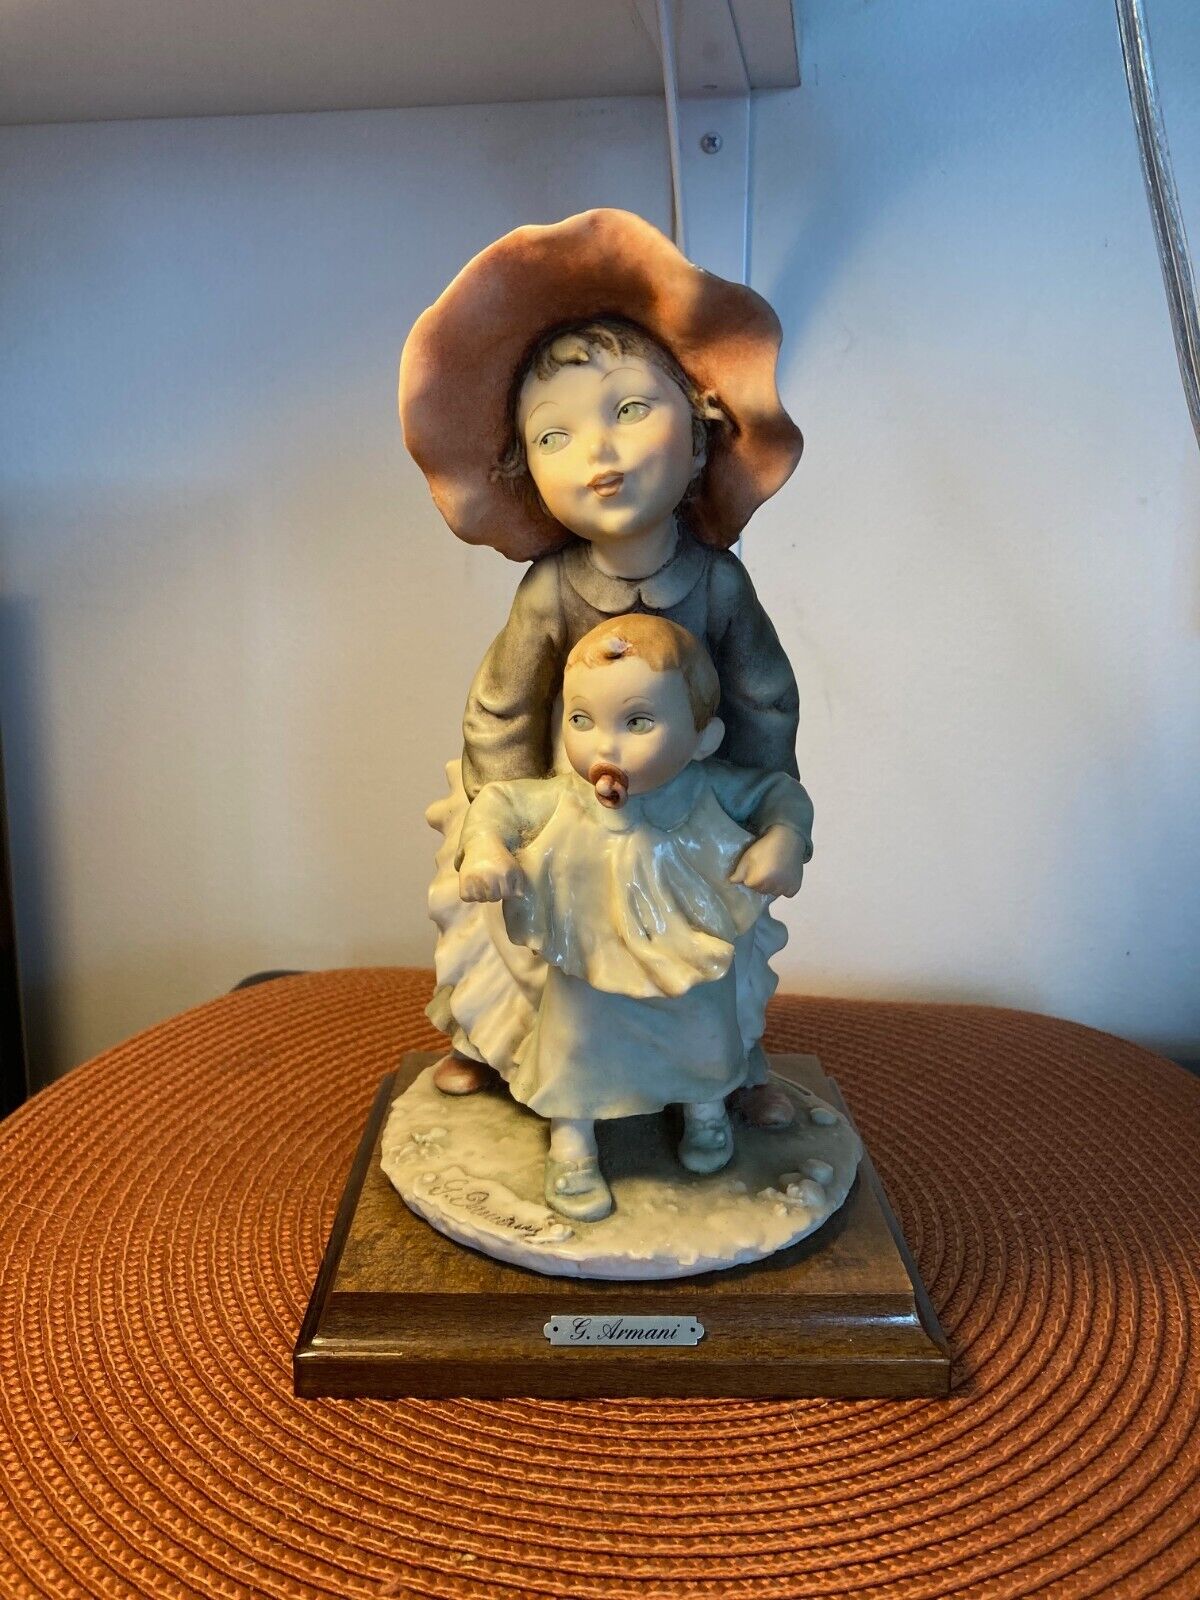 VINTAGE G.ARMANI (GIRL & BABY) 1982  5X9" FIGURINE ITALY AS IS